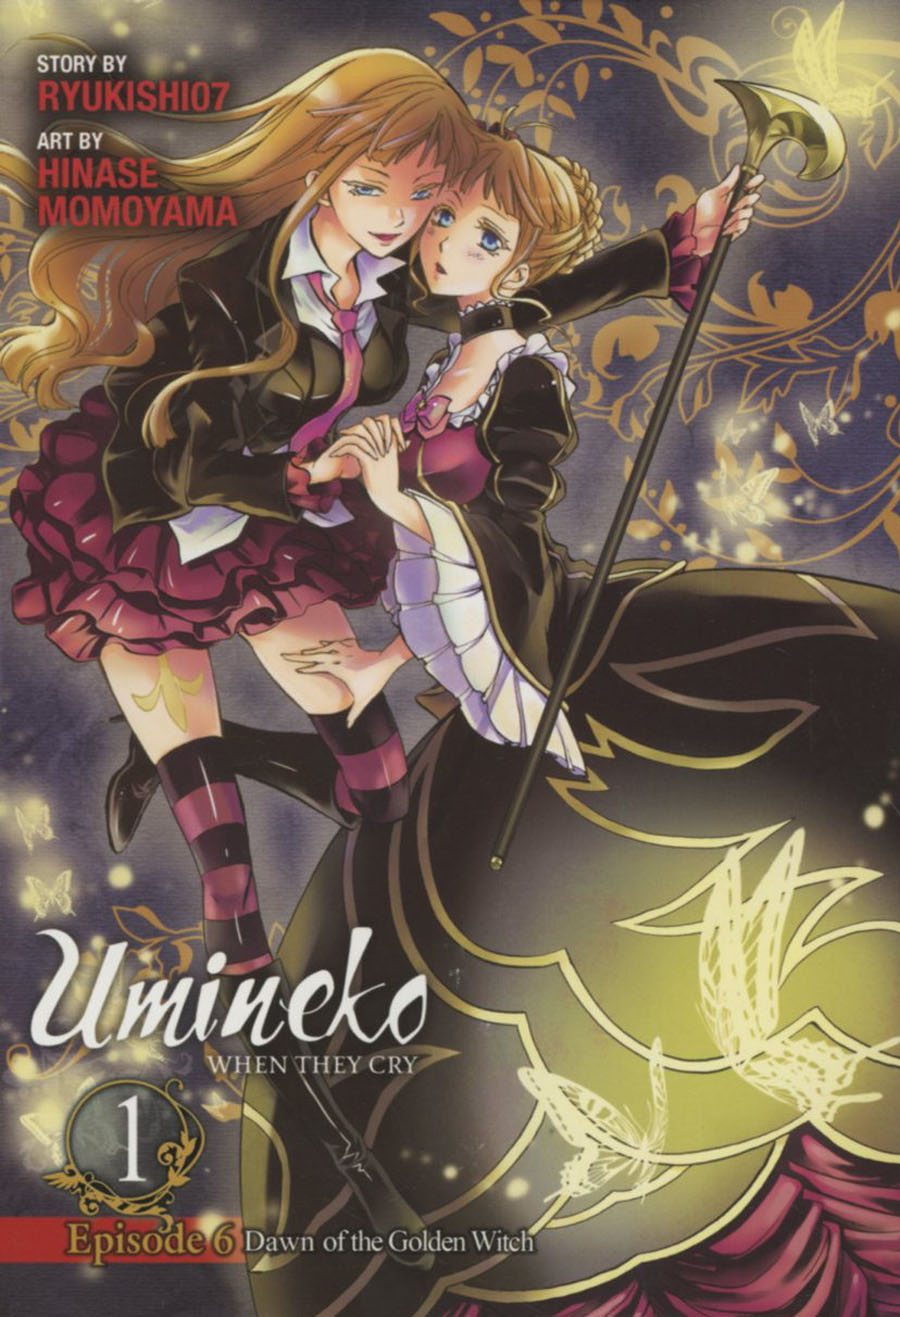 Umineko When They Cry Vol 13 Episode 6 Dawn Of The Golden Witch Part 1 GN